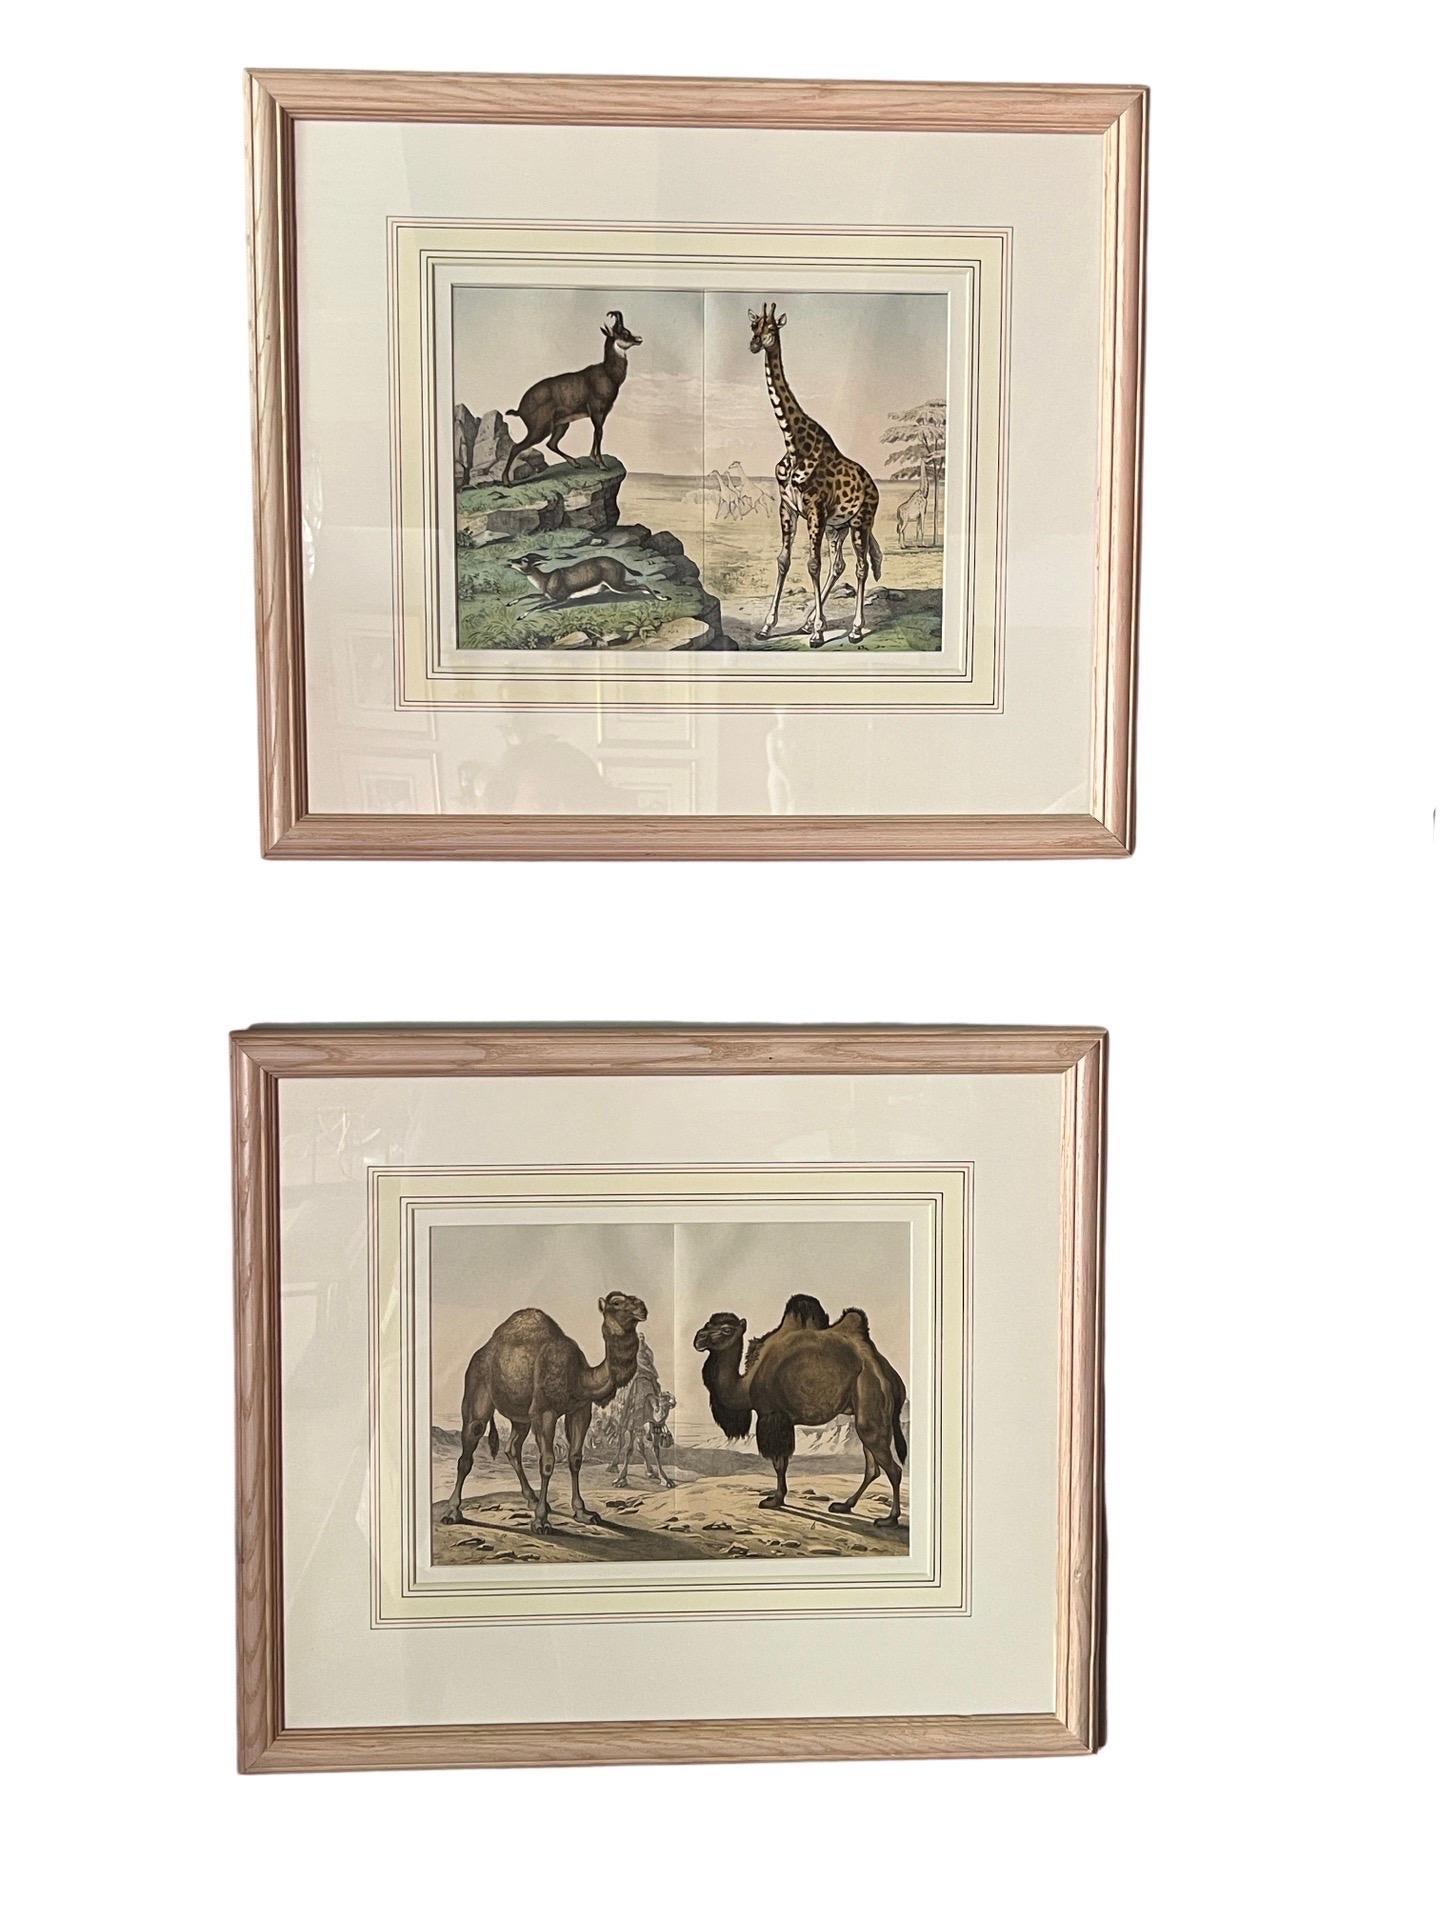 Set of 4, Natural History of the Animal Kingdom Engravings Circa 1860.

Each of these finely hand colored book plate engravings feature animals from all over the world. This series features Mammals including, Camels, Giraffes, various goats, bulls,